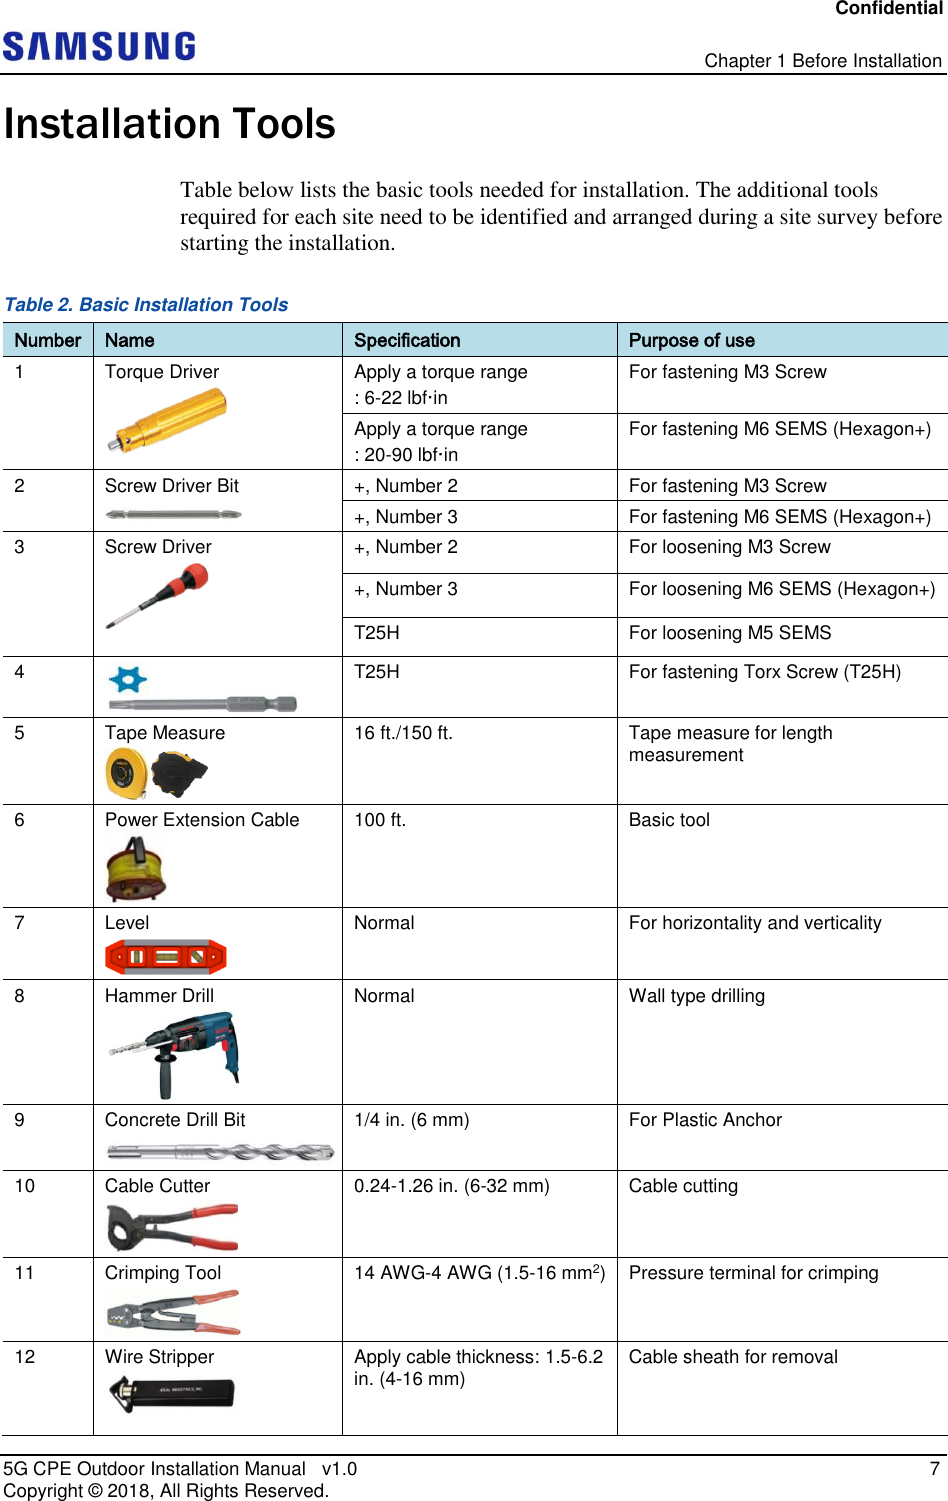 Confidential   Chapter 1 Before Installation 5G CPE Outdoor Installation Manual   v1.0    7 Copyright ©  2018, All Rights Reserved. Installation Tools Table below lists the basic tools needed for installation. The additional tools required for each site need to be identified and arranged during a site survey before starting the installation. Table 2. Basic Installation Tools Number Name Specification Purpose of use 1 Torque Driver  Apply a torque range : 6-22 lbf·in For fastening M3 Screw Apply a torque range : 20-90 lbf·in For fastening M6 SEMS (Hexagon+)  2 Screw Driver Bit  +, Number 2 For fastening M3 Screw +, Number 3 For fastening M6 SEMS (Hexagon+) 3 Screw Driver  +, Number 2 For loosening M3 Screw +, Number 3 For loosening M6 SEMS (Hexagon+) T25H For loosening M5 SEMS 4  T25H For fastening Torx Screw (T25H) 5 Tape Measure  16 ft./150 ft.  Tape measure for length measurement 6 Power Extension Cable  100 ft. Basic tool 7 Level  Normal For horizontality and verticality 8 Hammer Drill  Normal Wall type drilling 9 Concrete Drill Bit  1/4 in. (6 mm) For Plastic Anchor  10 Cable Cutter  0.24-1.26 in. (6-32 mm) Cable cutting 11 Crimping Tool  14 AWG-4 AWG (1.5-16 mm2) Pressure terminal for crimping 12 Wire Stripper  Apply cable thickness: 1.5-6.2 in. (4-16 mm) Cable sheath for removal 